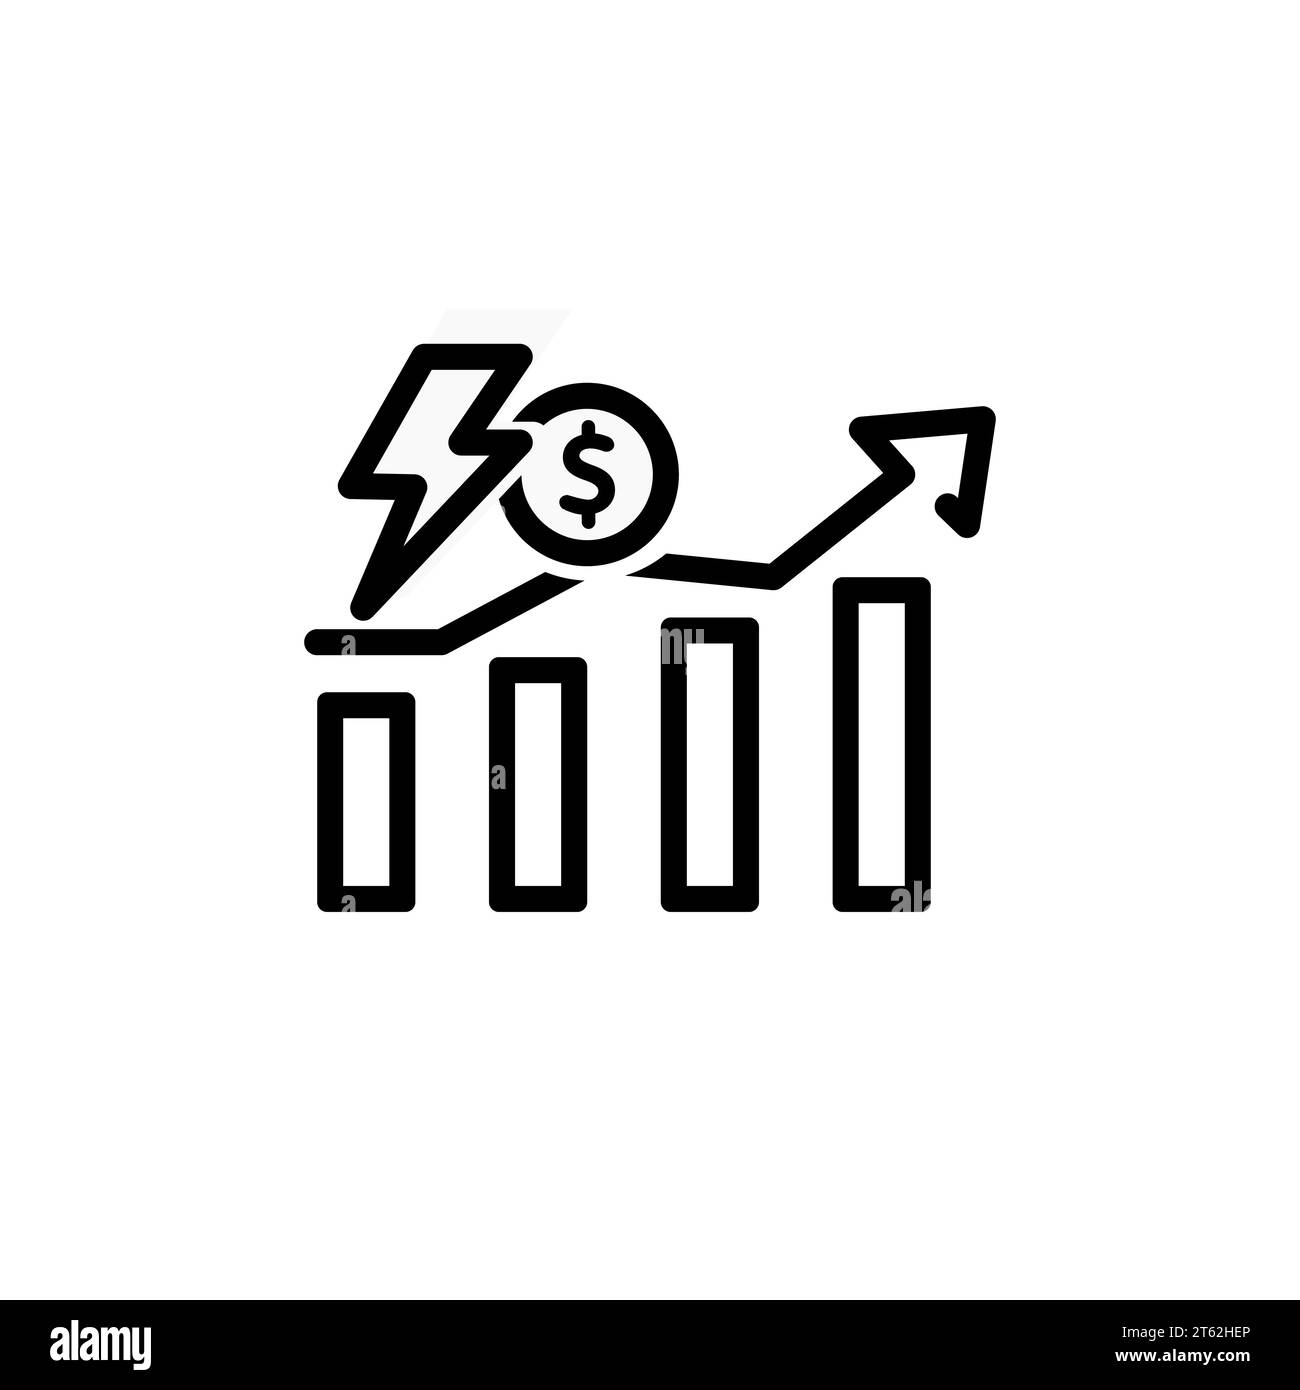 Electricity cost concept. Vector icon isolated on white background. Stock Vector